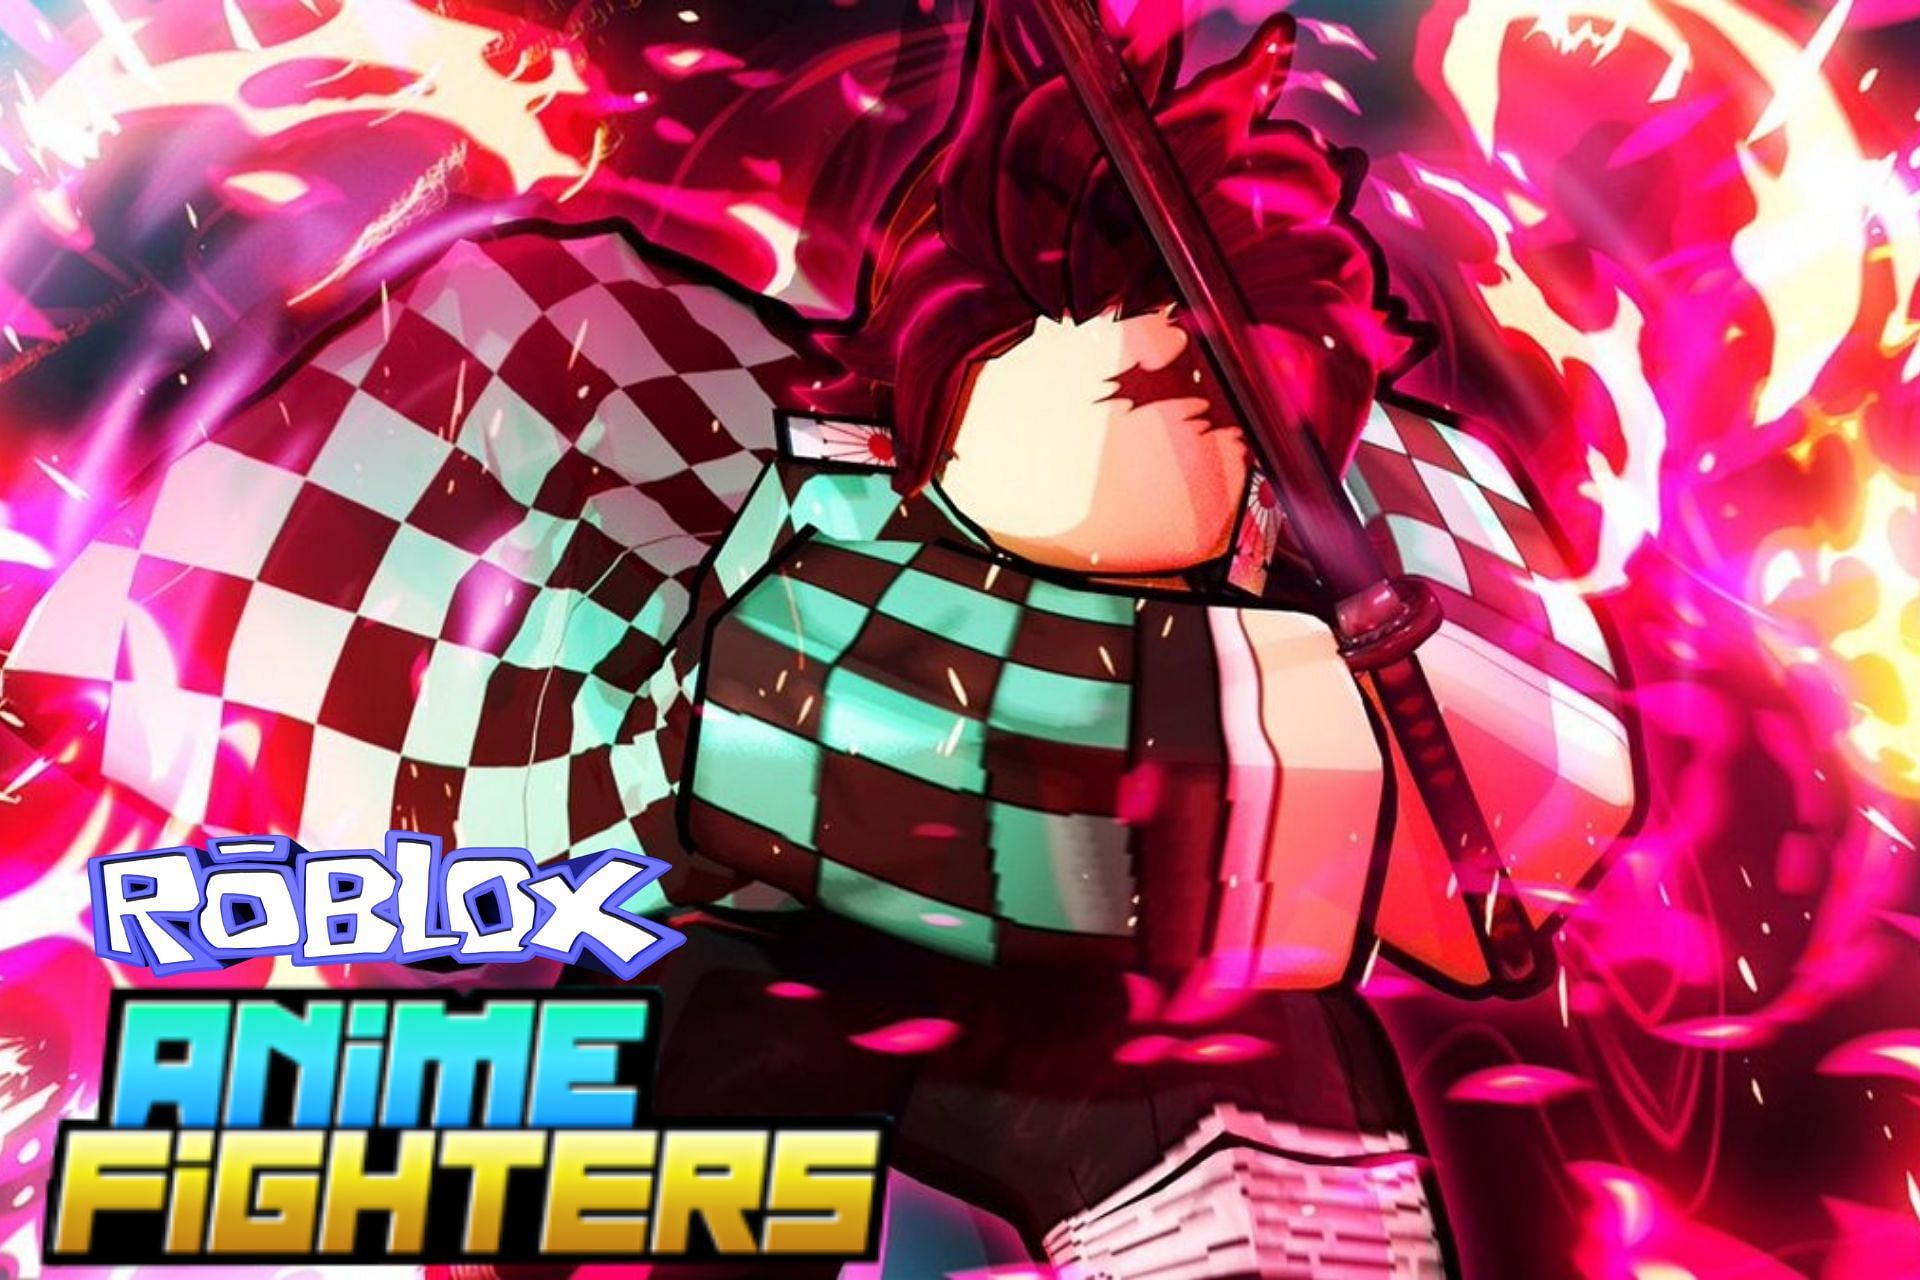 Anime Fighters codes in Roblox: Free Yen, Luck Boost, and more